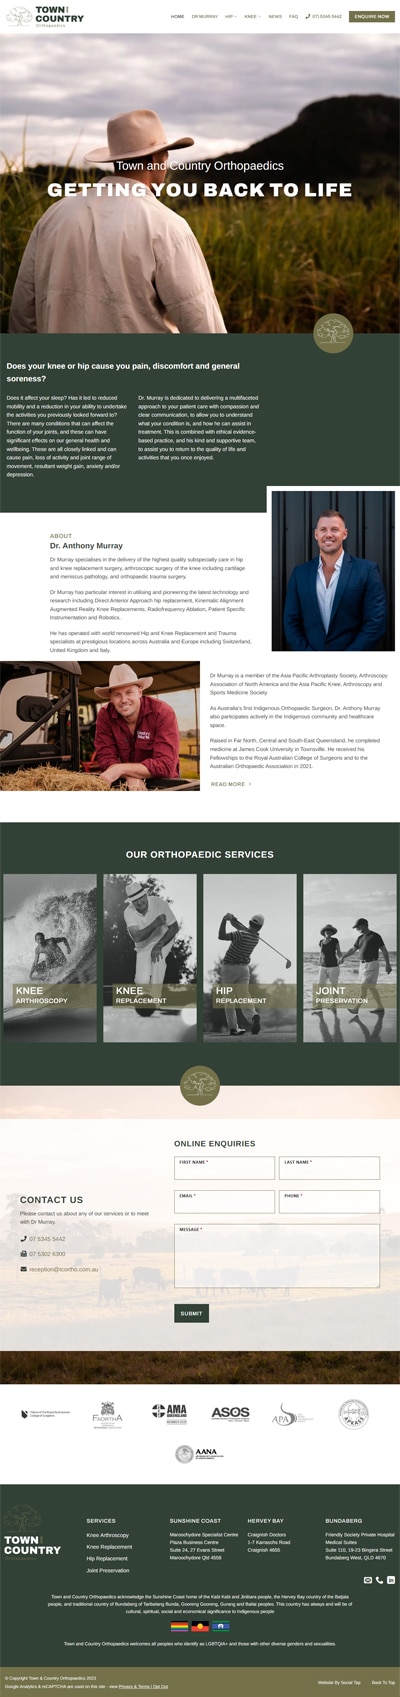 Our Work Hospitality Tourism Website Design Town And Country Orthopaedics01